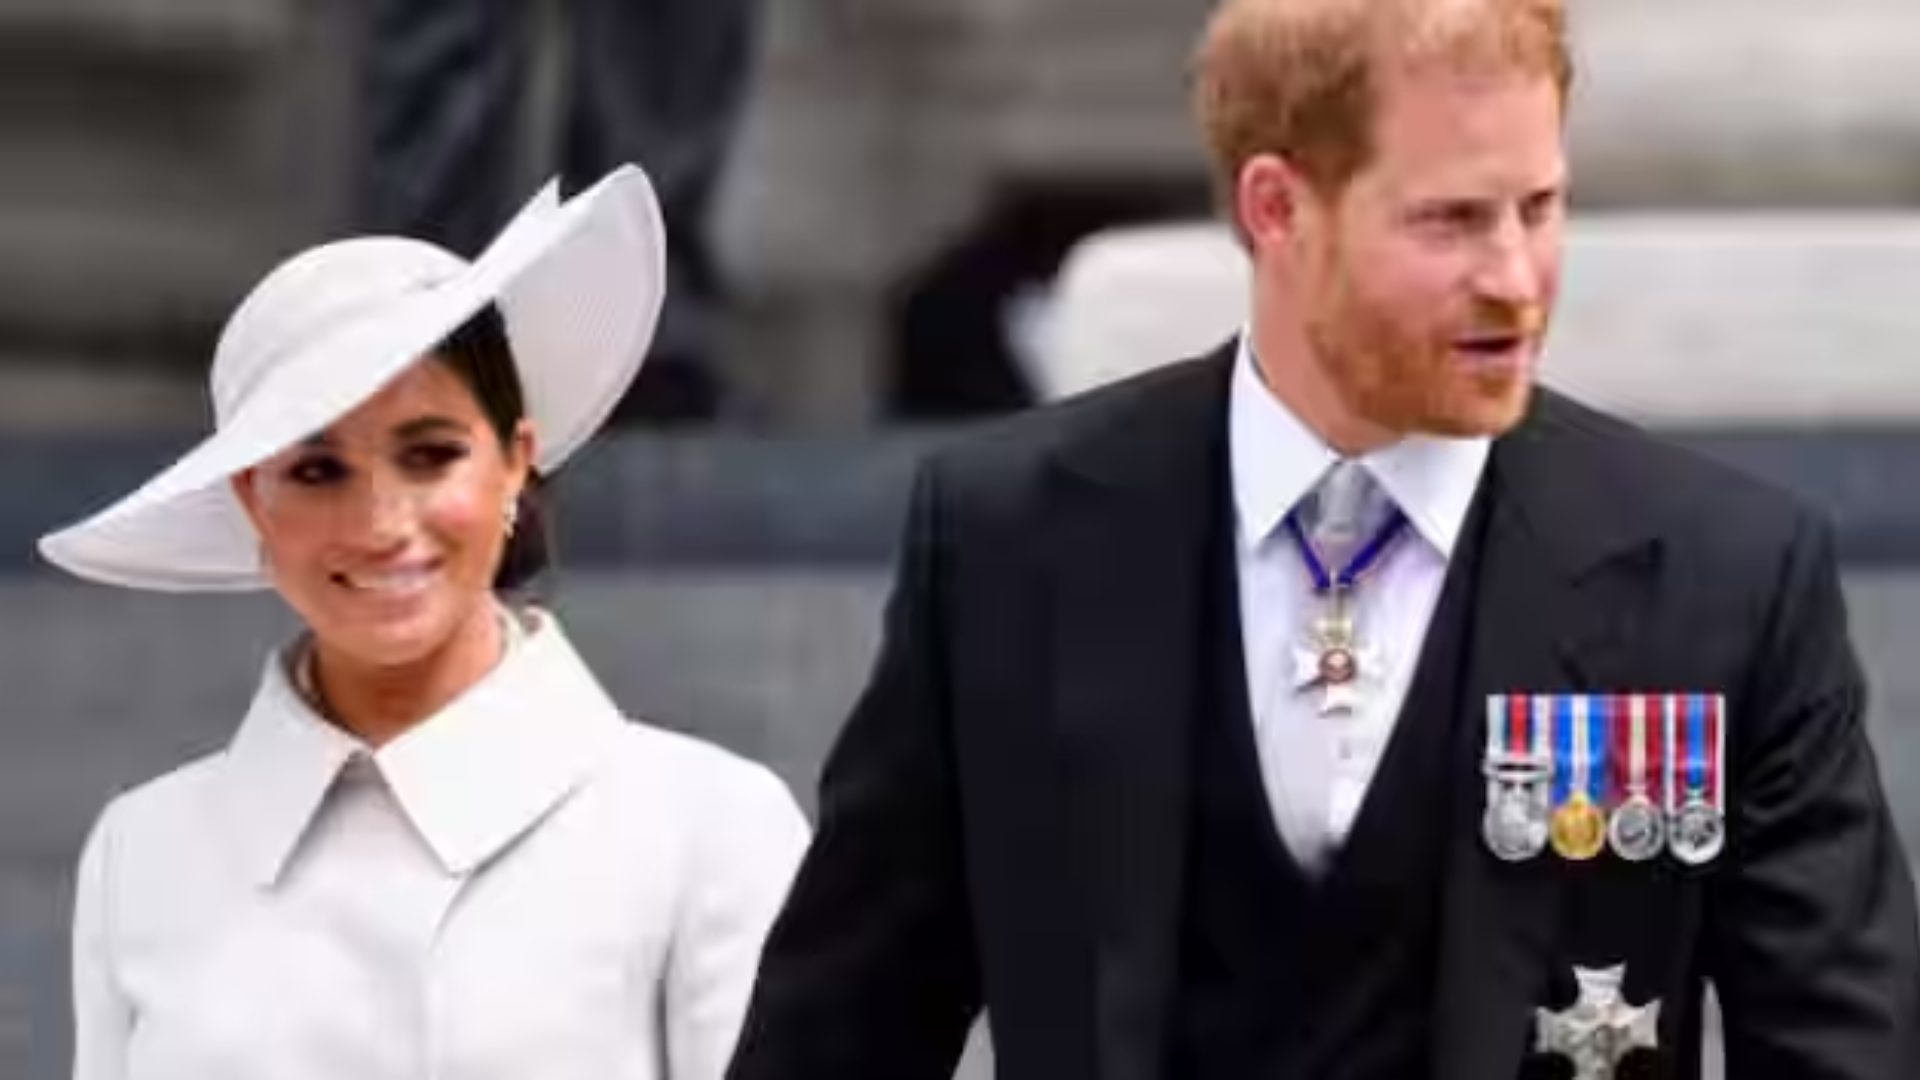 Archewell Foundation, Led by Prince Harry and Meghan Markle, Ordered to Halt Activities